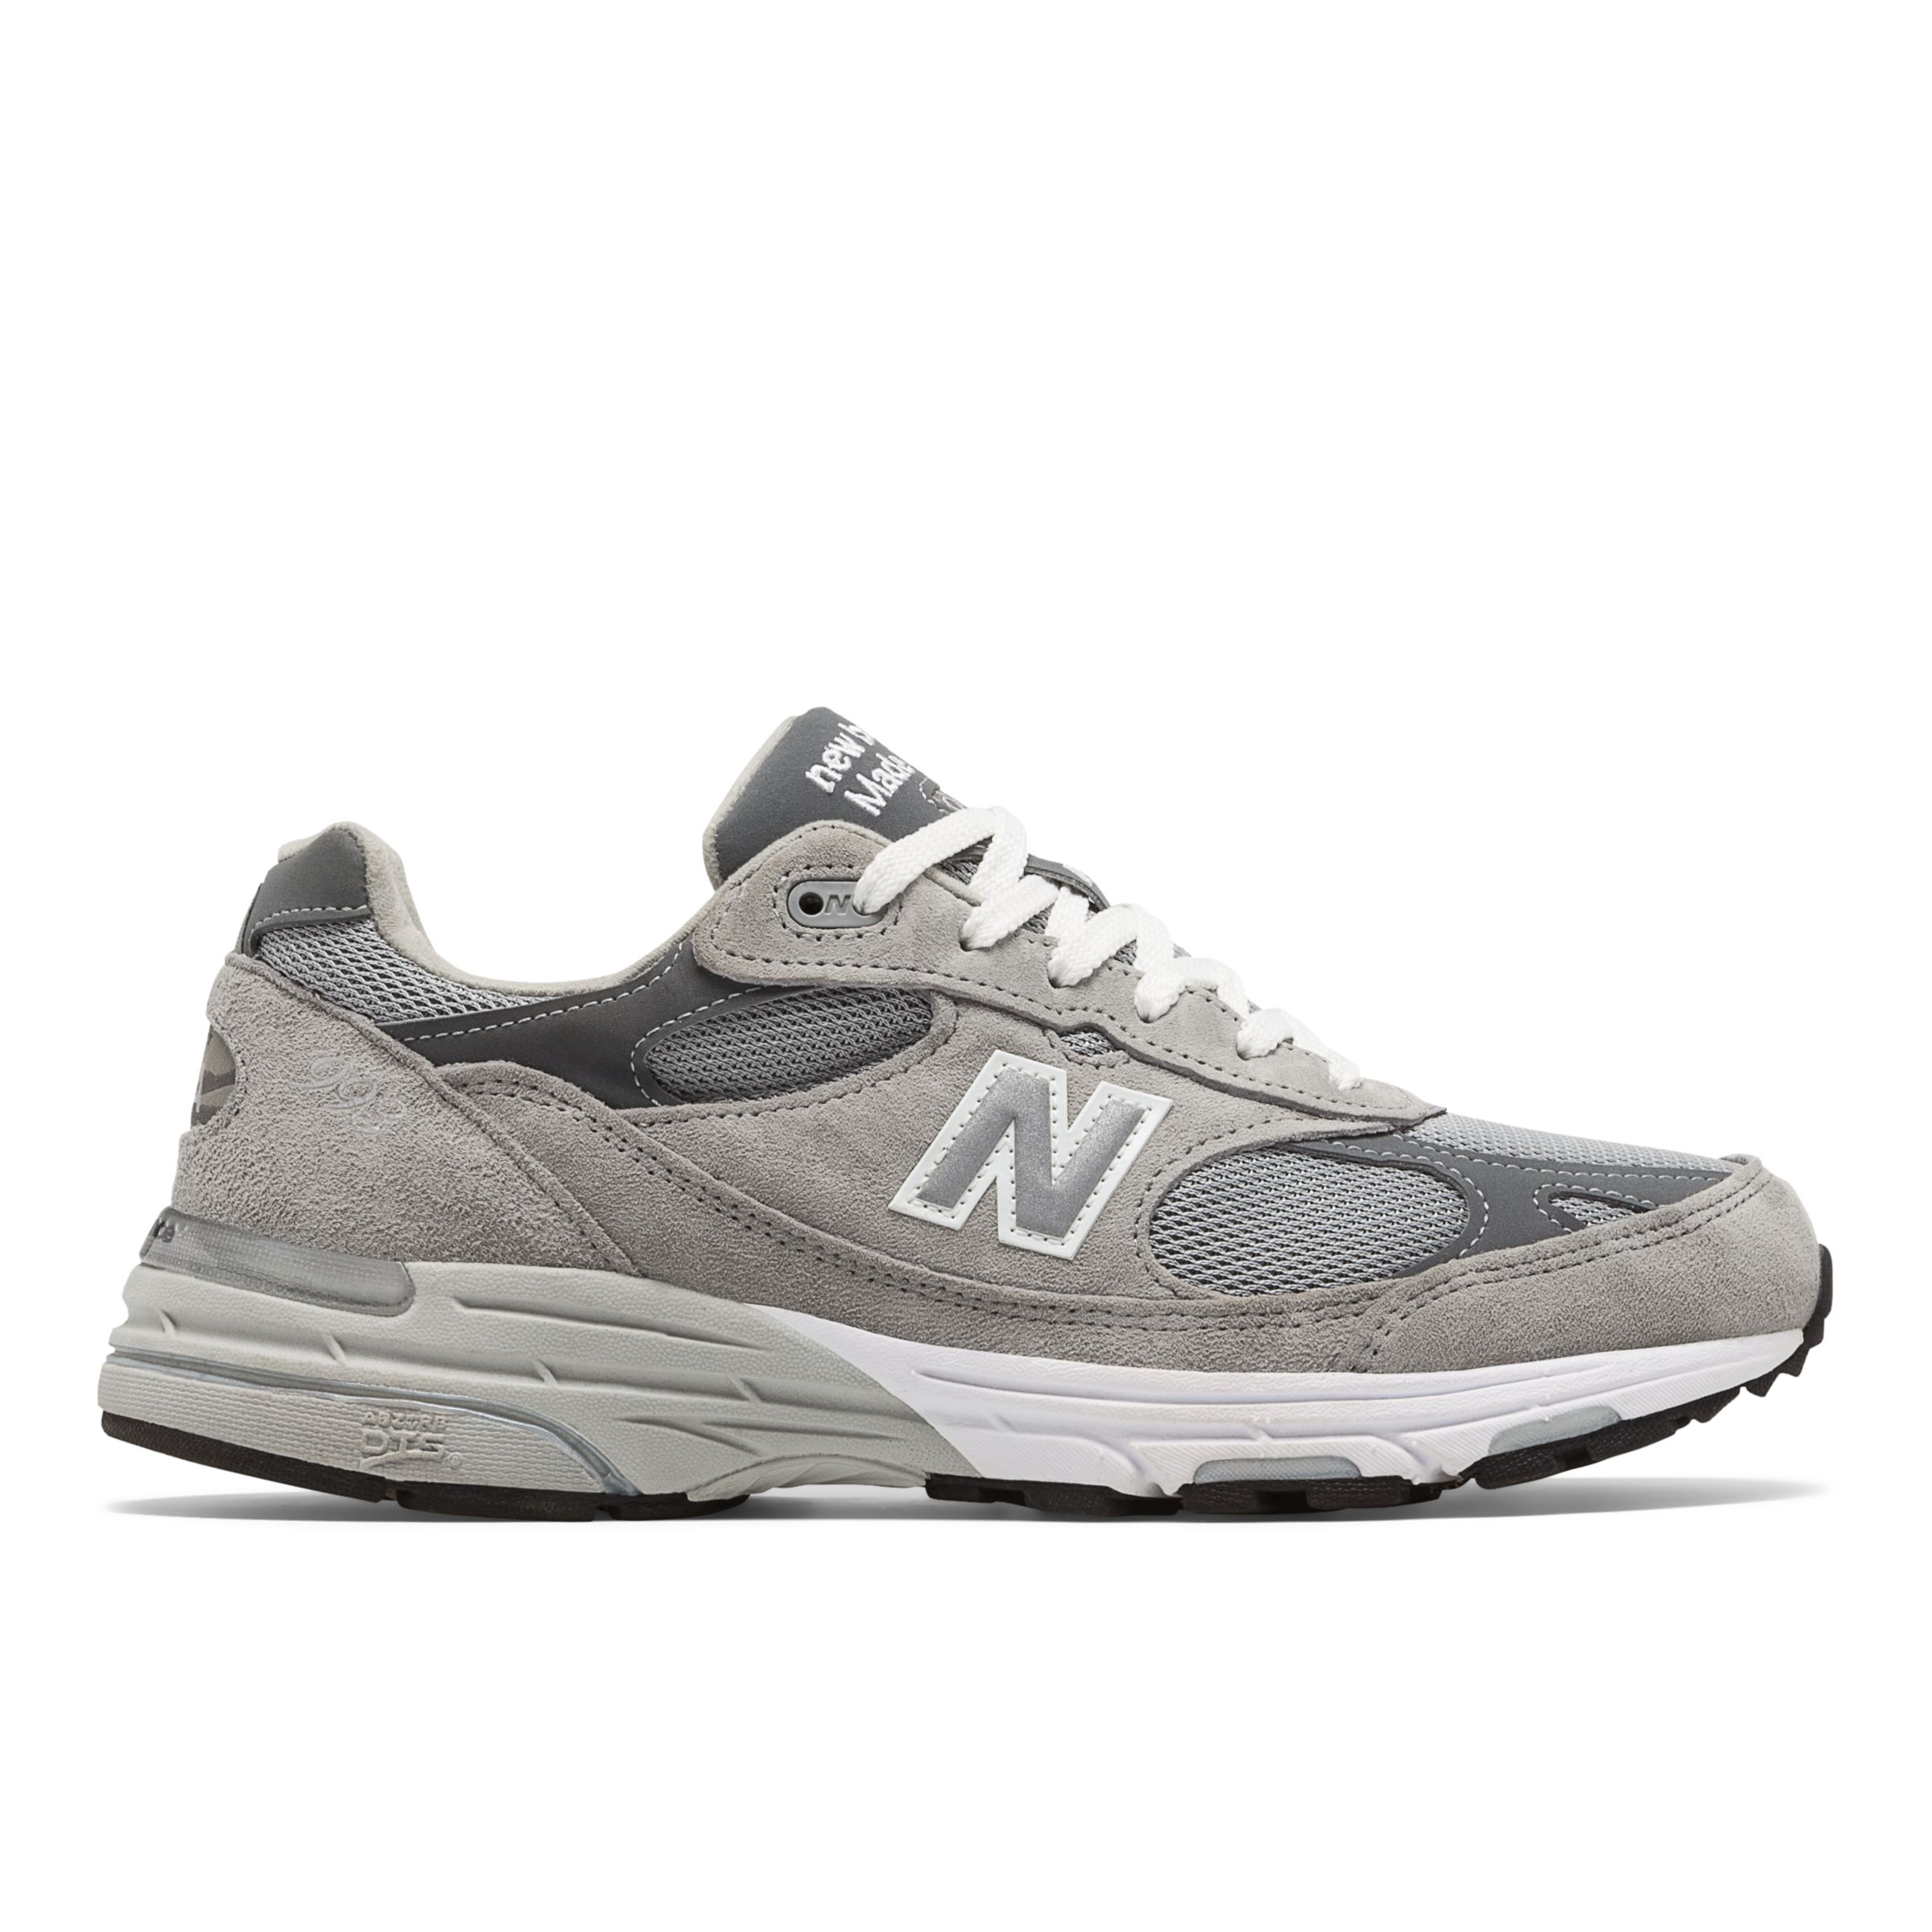 Women\u0027s Shoes Made in USA | Deep Discounts on Women\u0027s New Balance | Joe\u0027s  New Balance Outlet